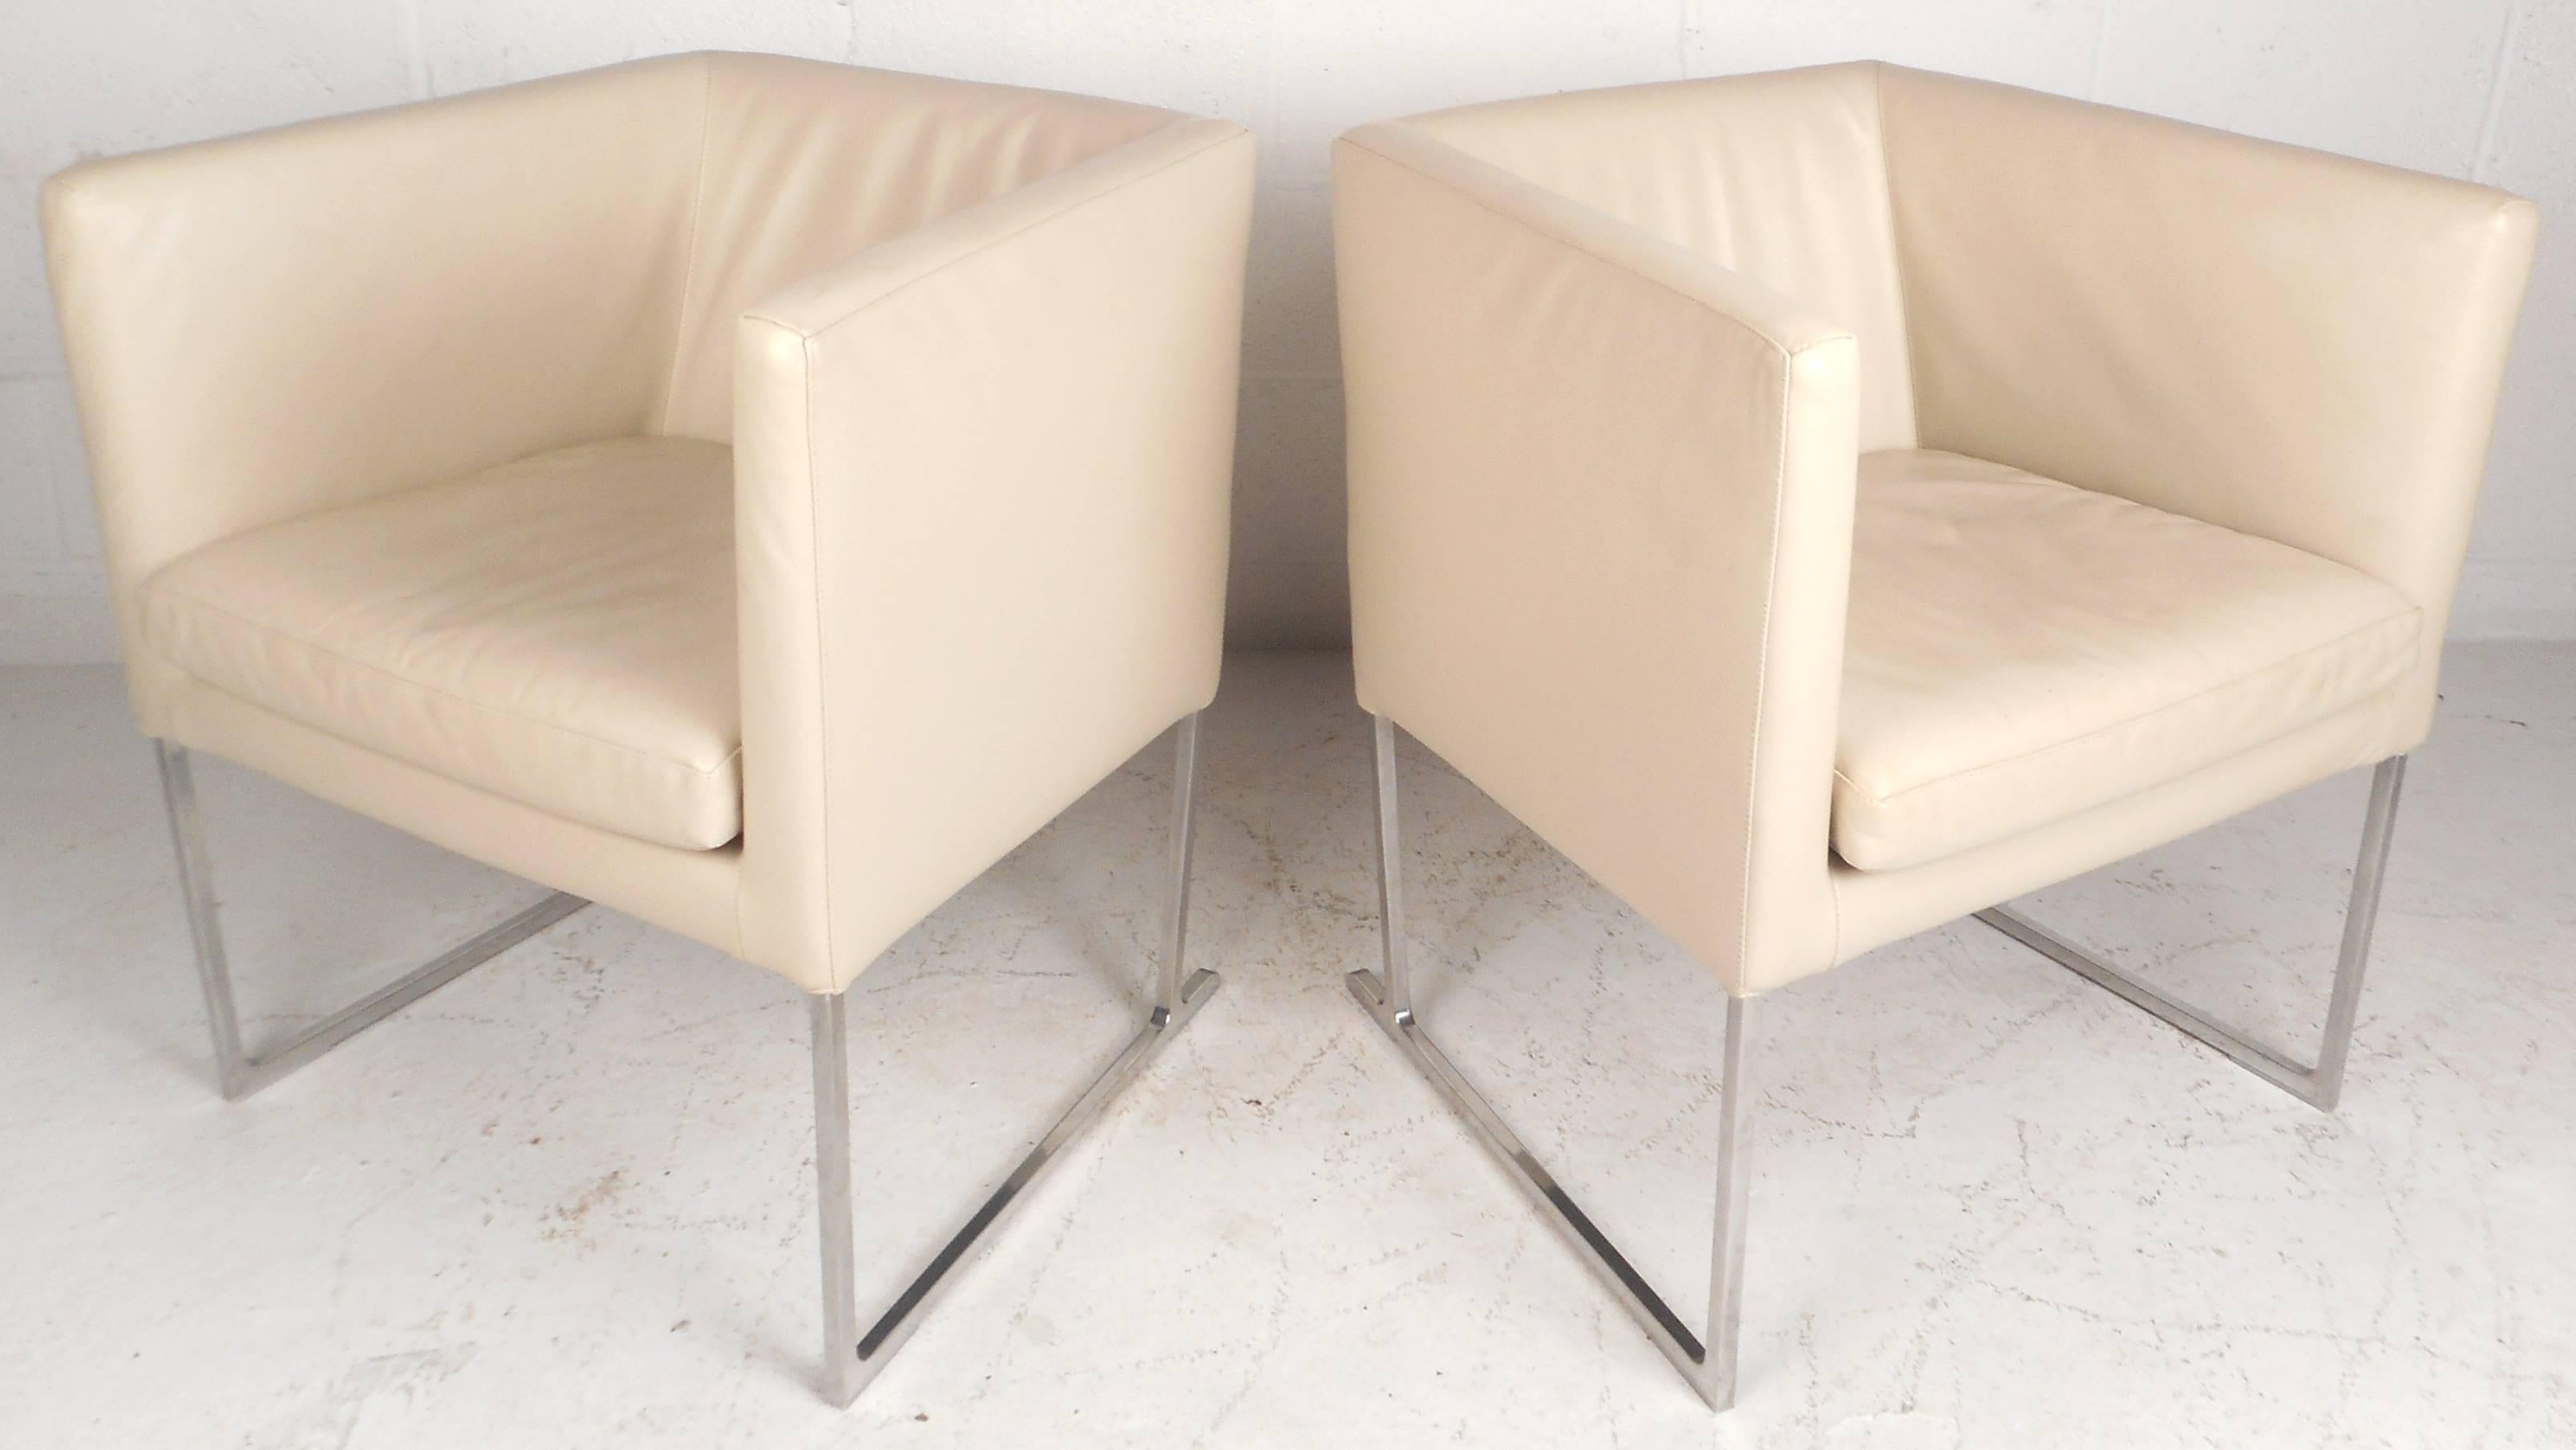 This beautiful pair of Contemporary modern Italian lounge chairs feature a unique cube shape with heavy chrome sled legs. This unusual pair is covered in white vinyl with a thick cushion and high arm rests. Quality design with straight lines ensures